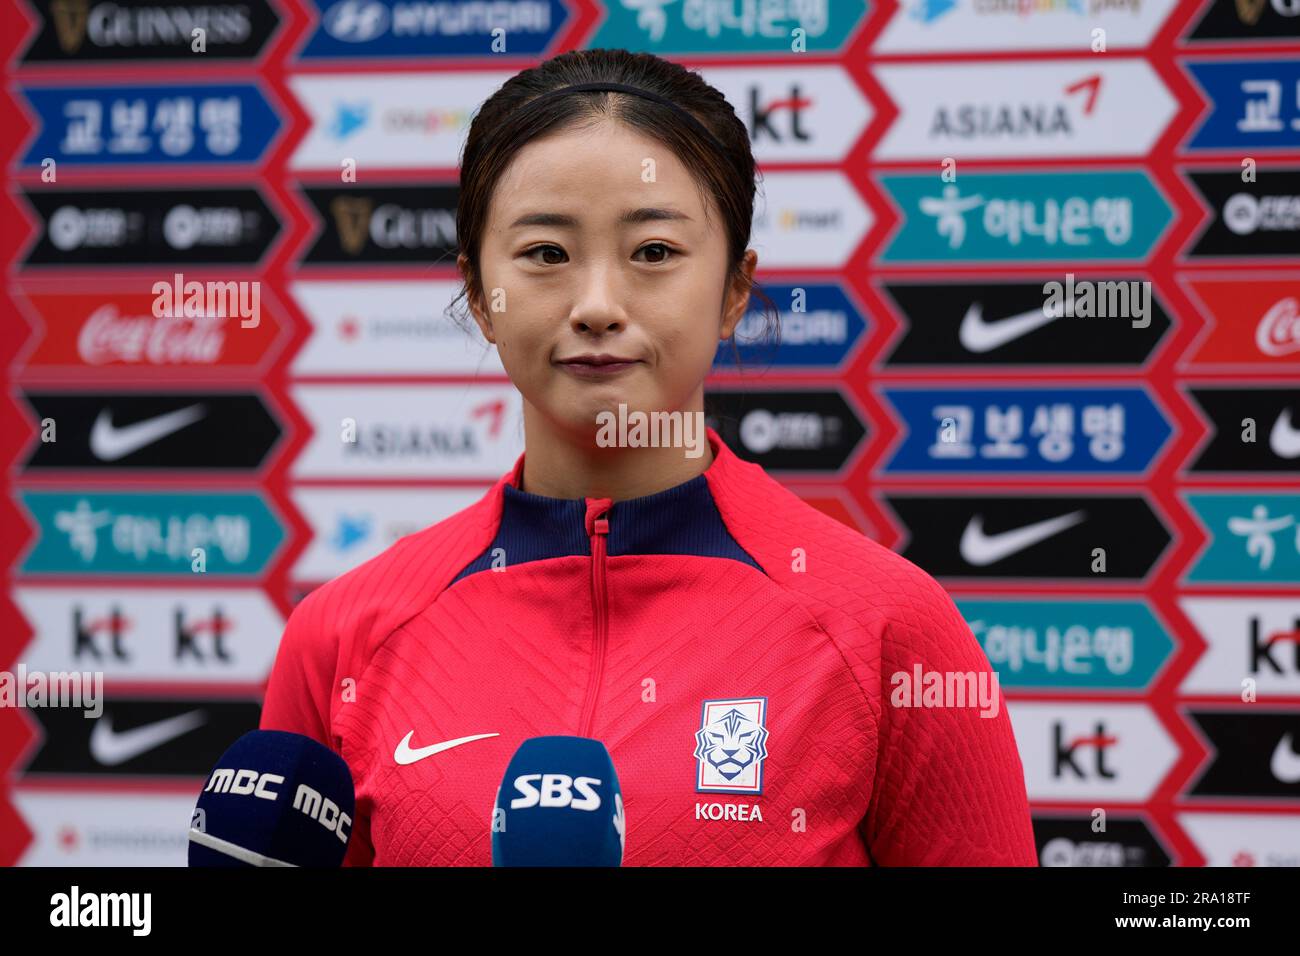 South Korea's women national soccer team player Choe Yu-ri speaks to the  media before a training session ahead of the FIFA Women's World Cup at the  National Football Center in Paju, South